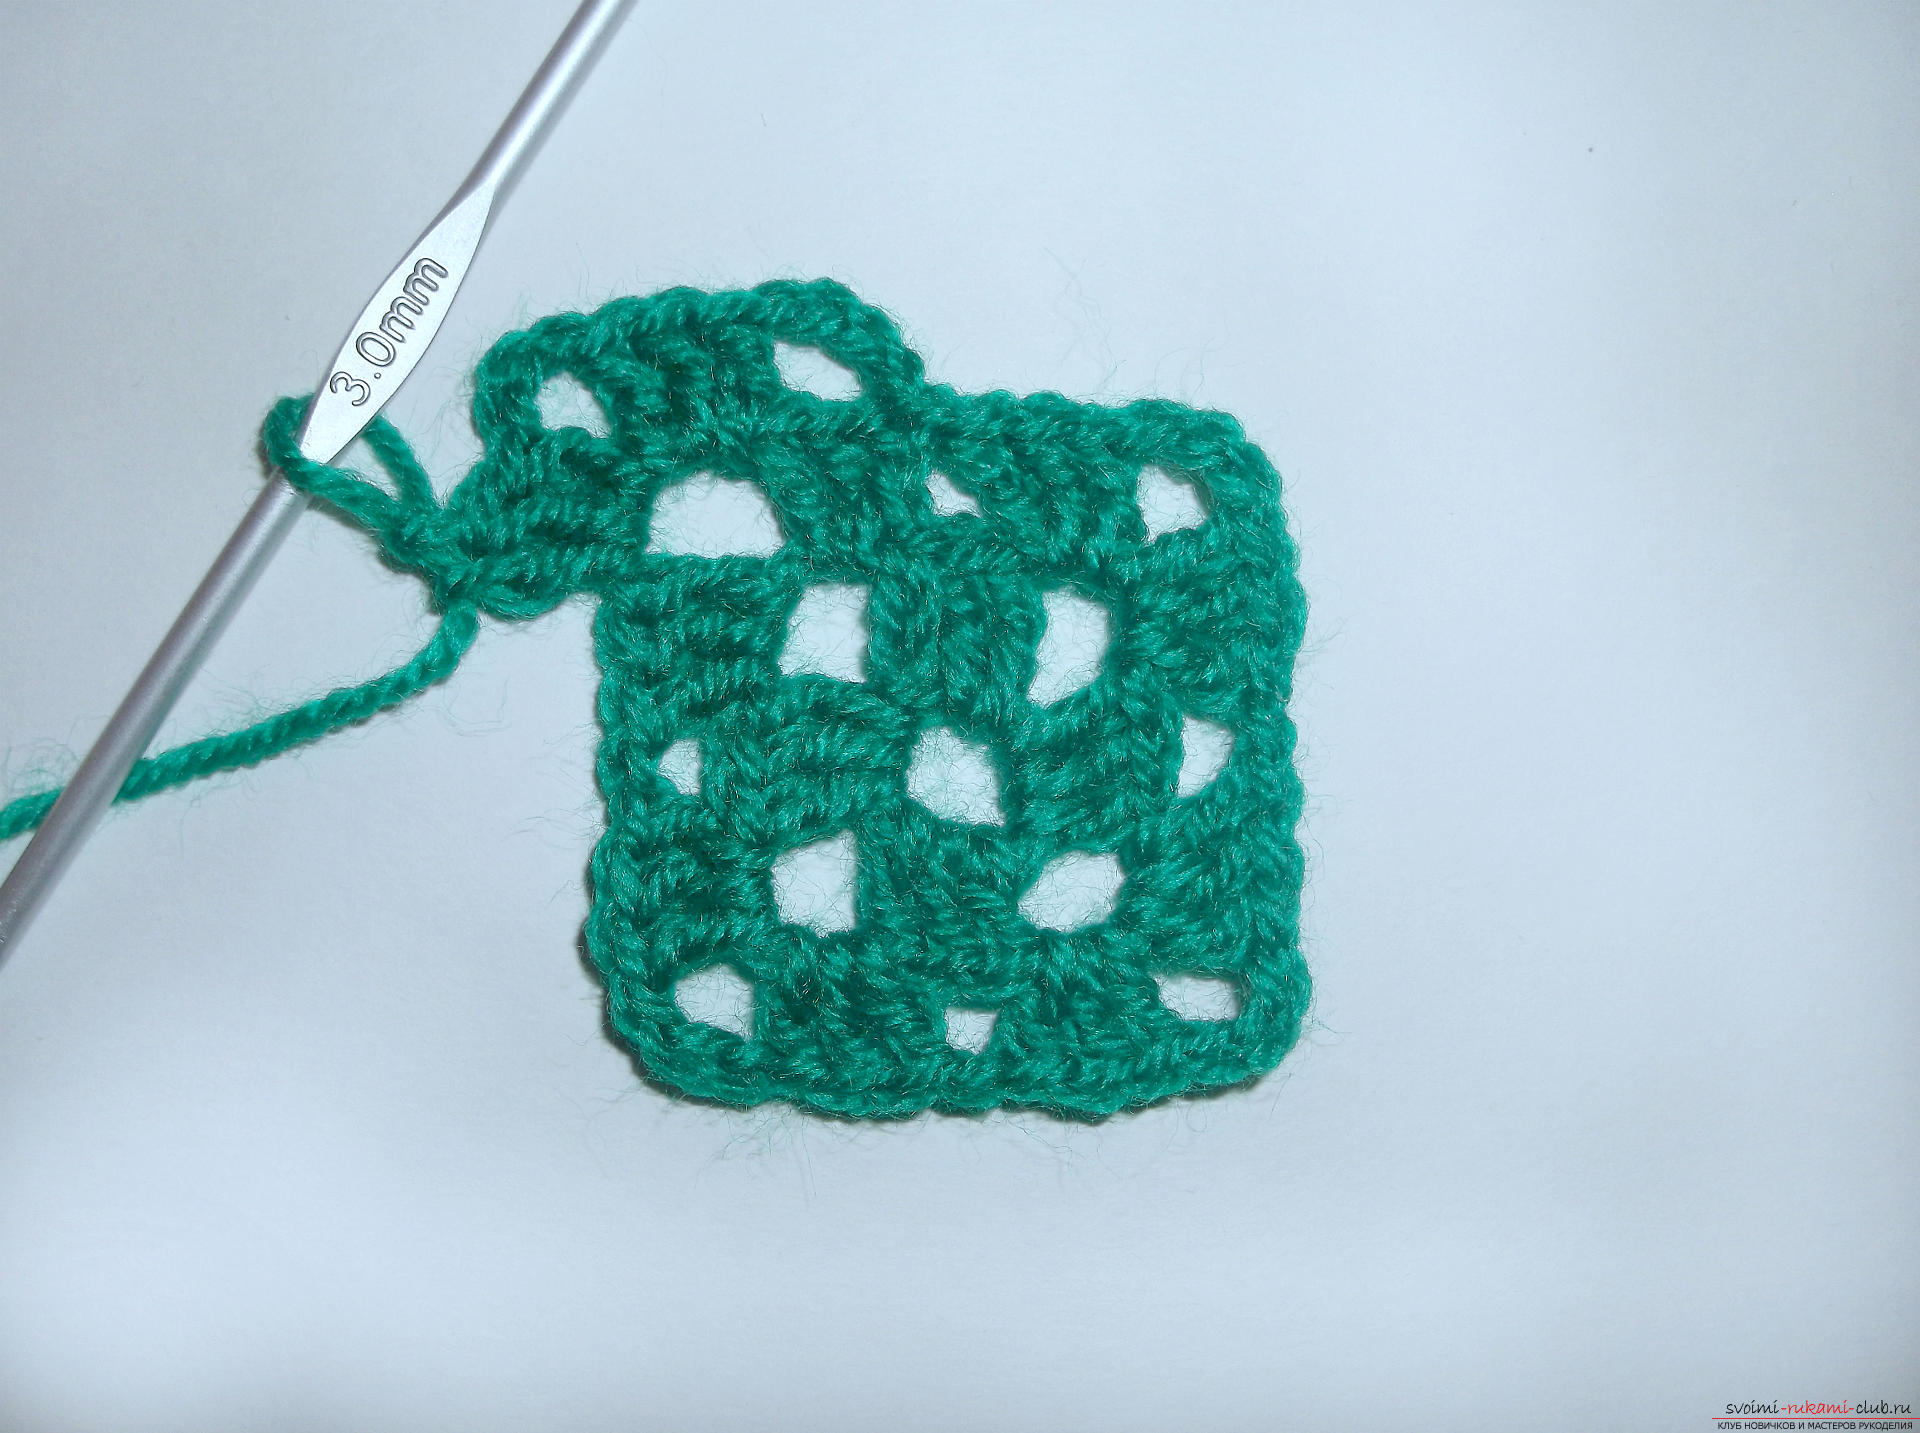 Photo to a lesson on crocheting crochet. Photo №6